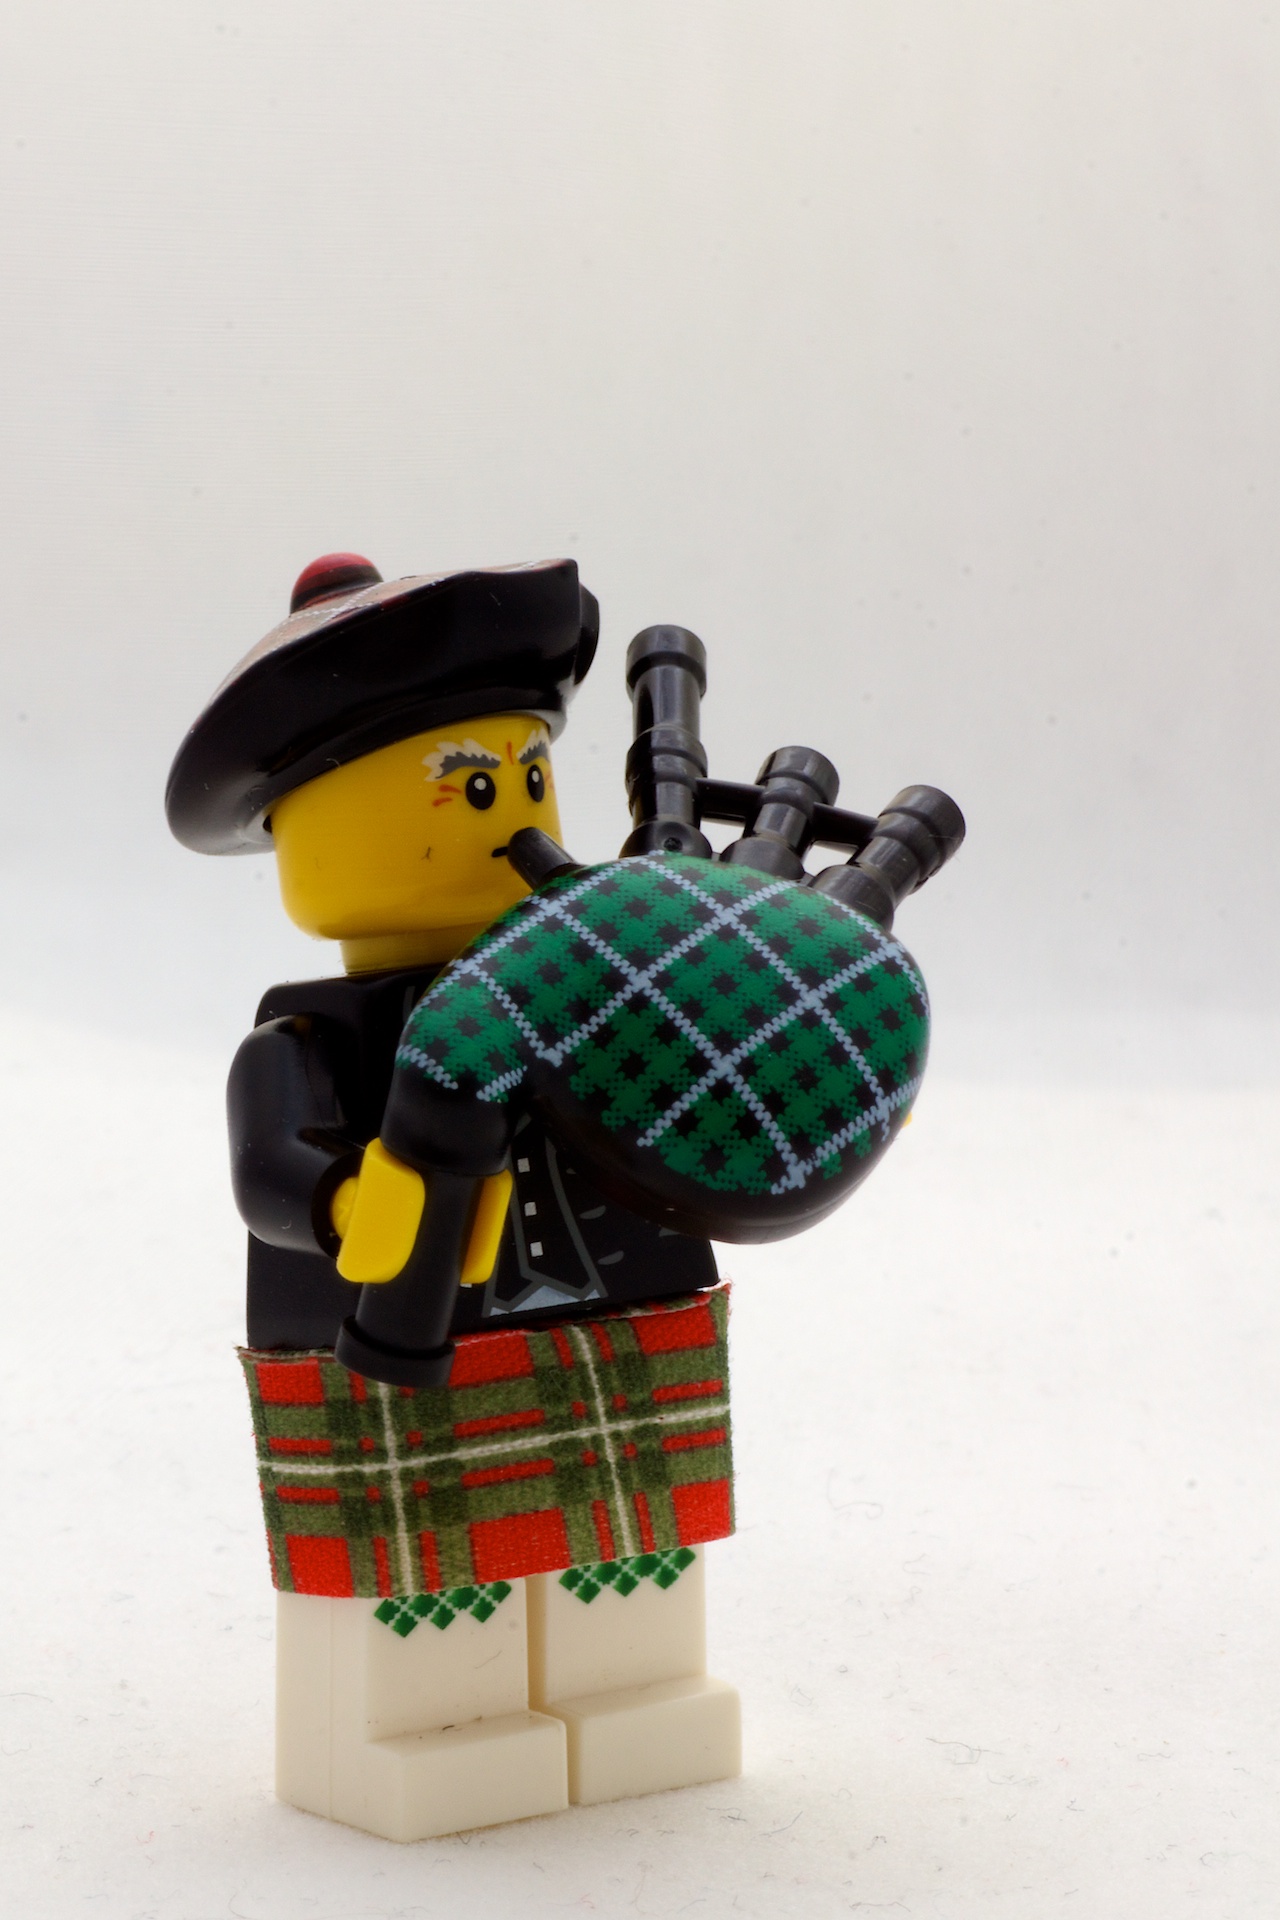 a lego toy has a bagpipe and an officer